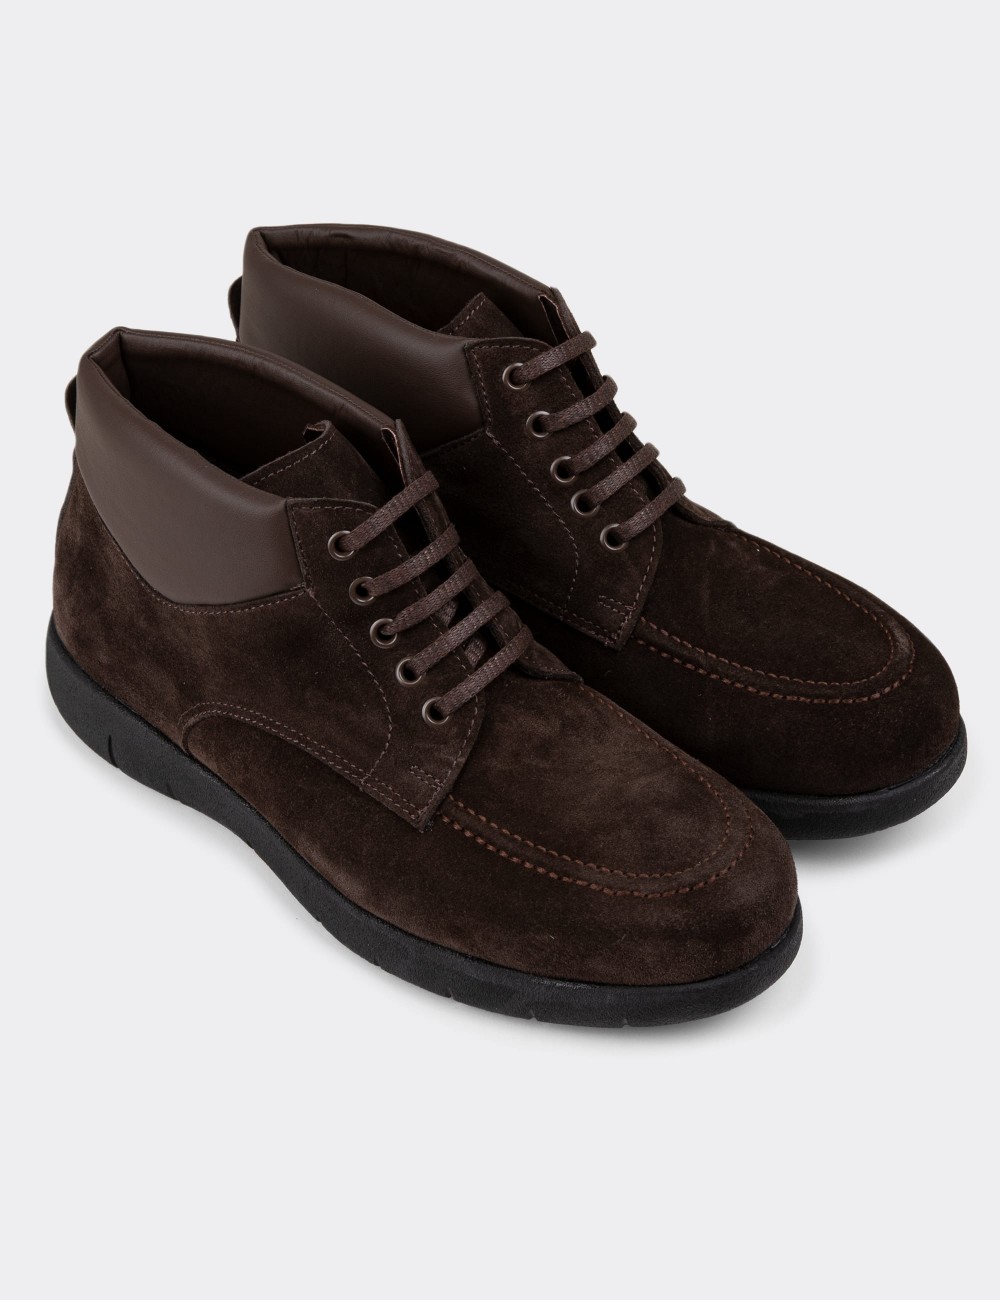 Brown Suede Leather Boots - 01928MKHVC01